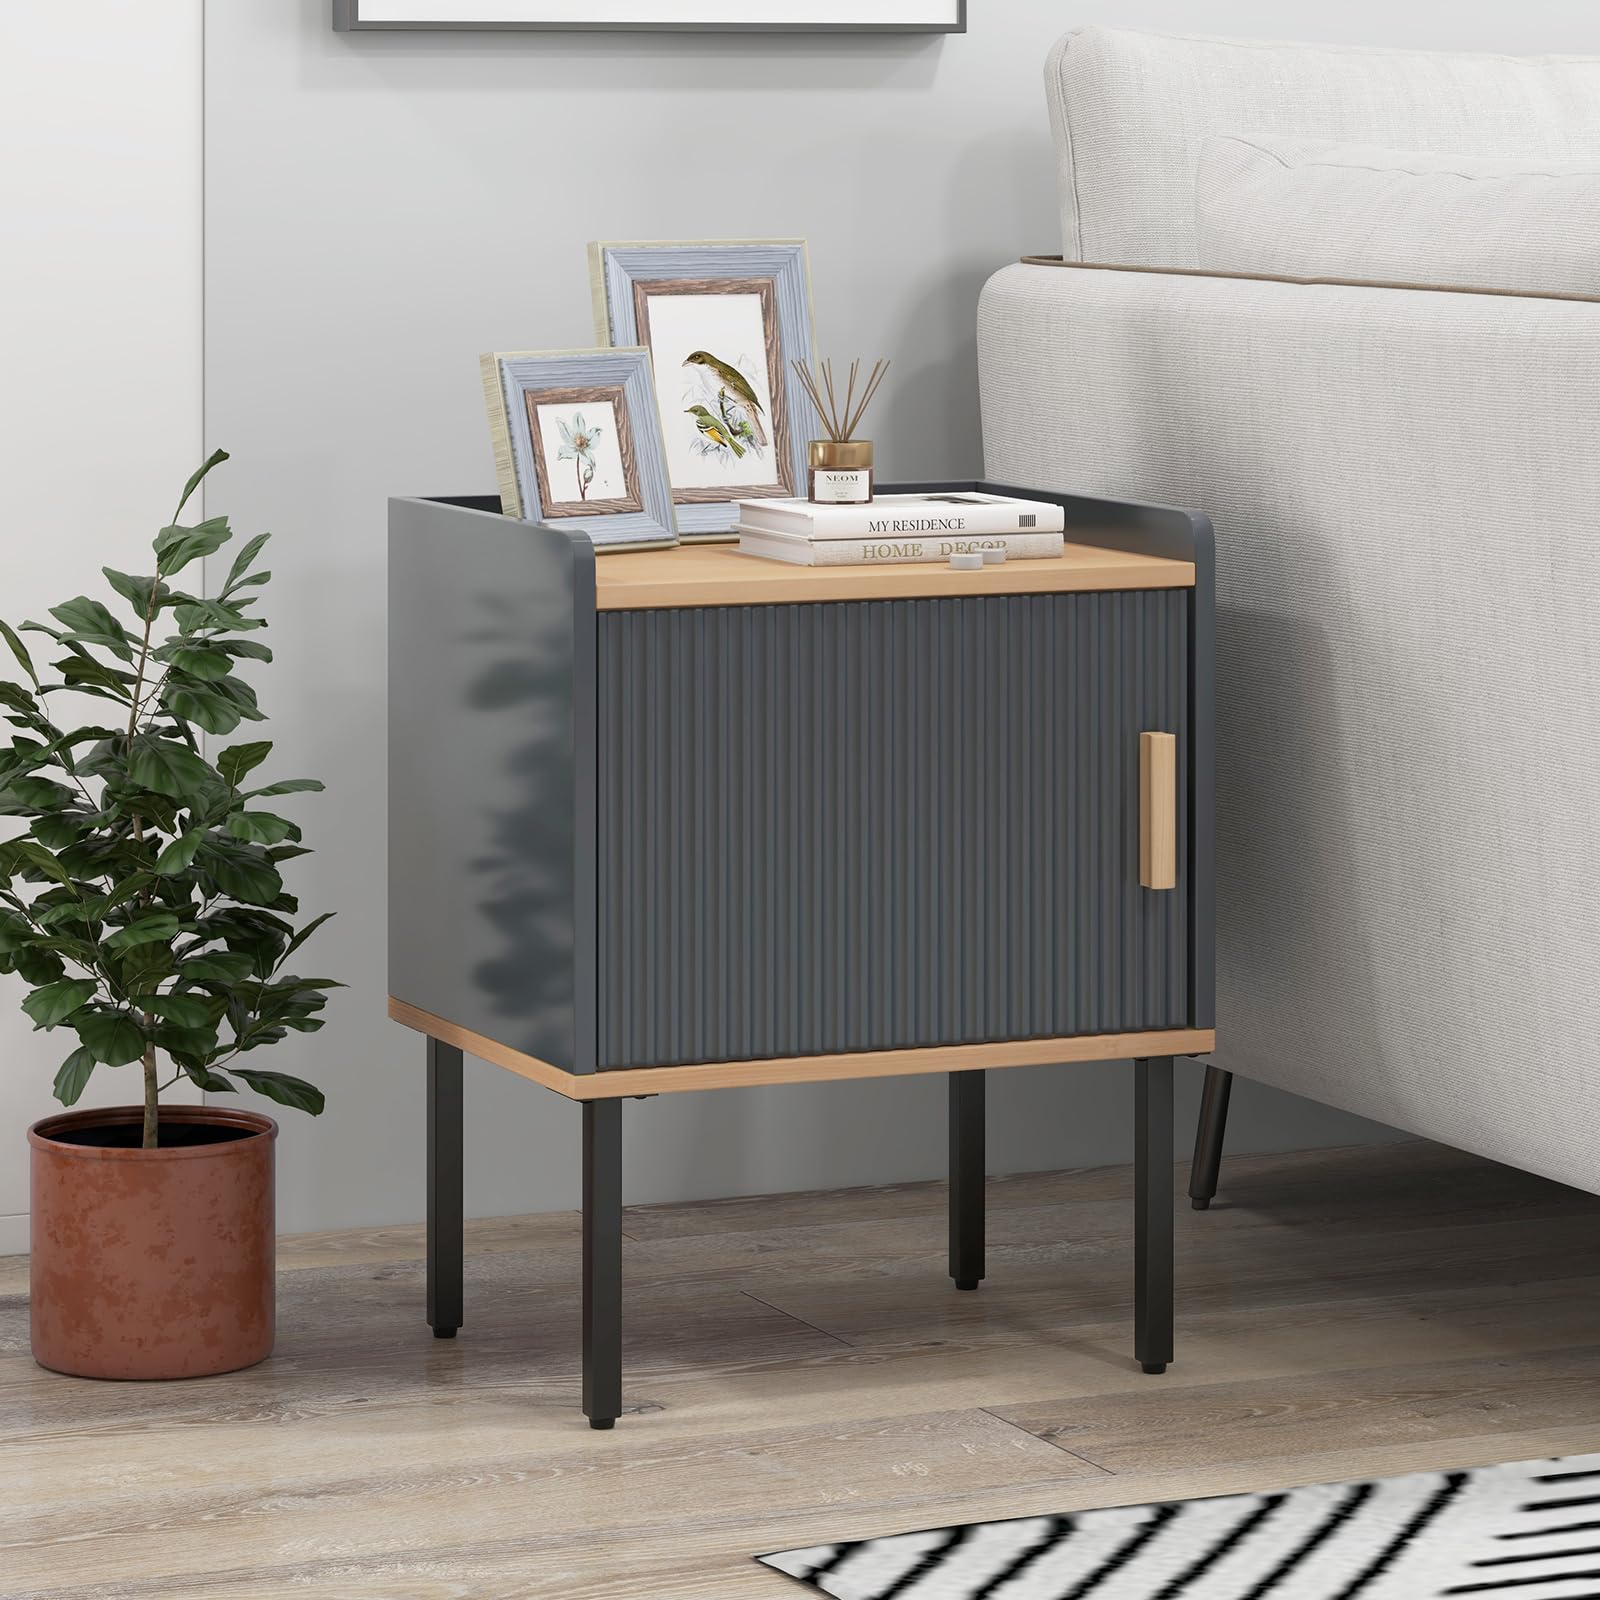 Giantex Nightstand with Storage, Bedside Table with Single Door Cabinet, Small Space, Gray